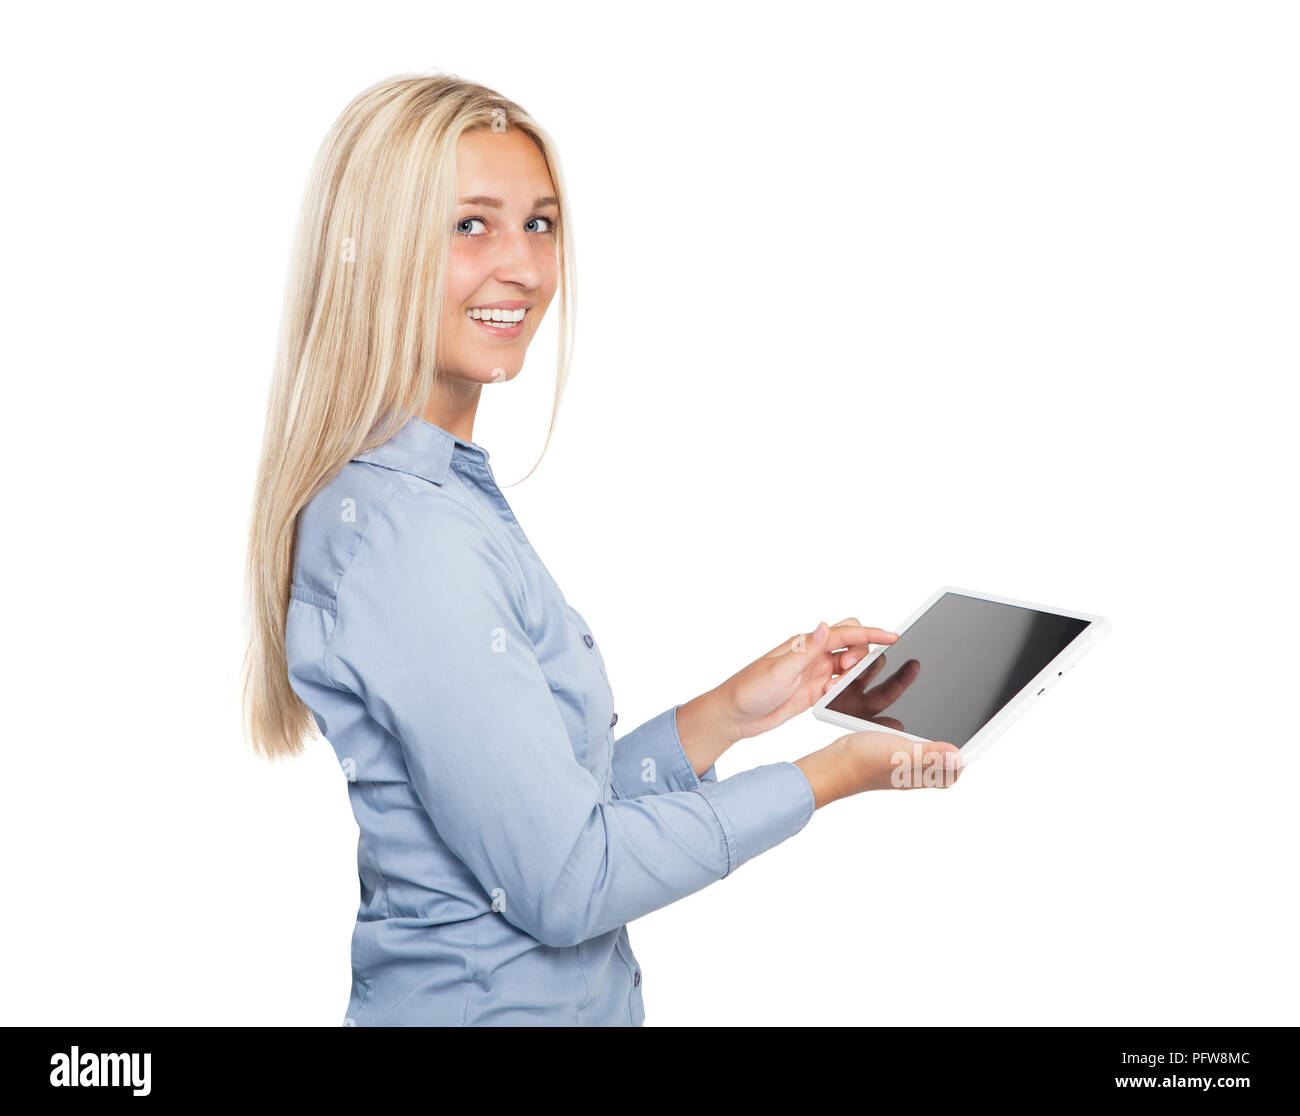 a young blonde woman with blue eyes holds a tabletbook in her hands and laughs at the camera, white background, isolated Stock Photo